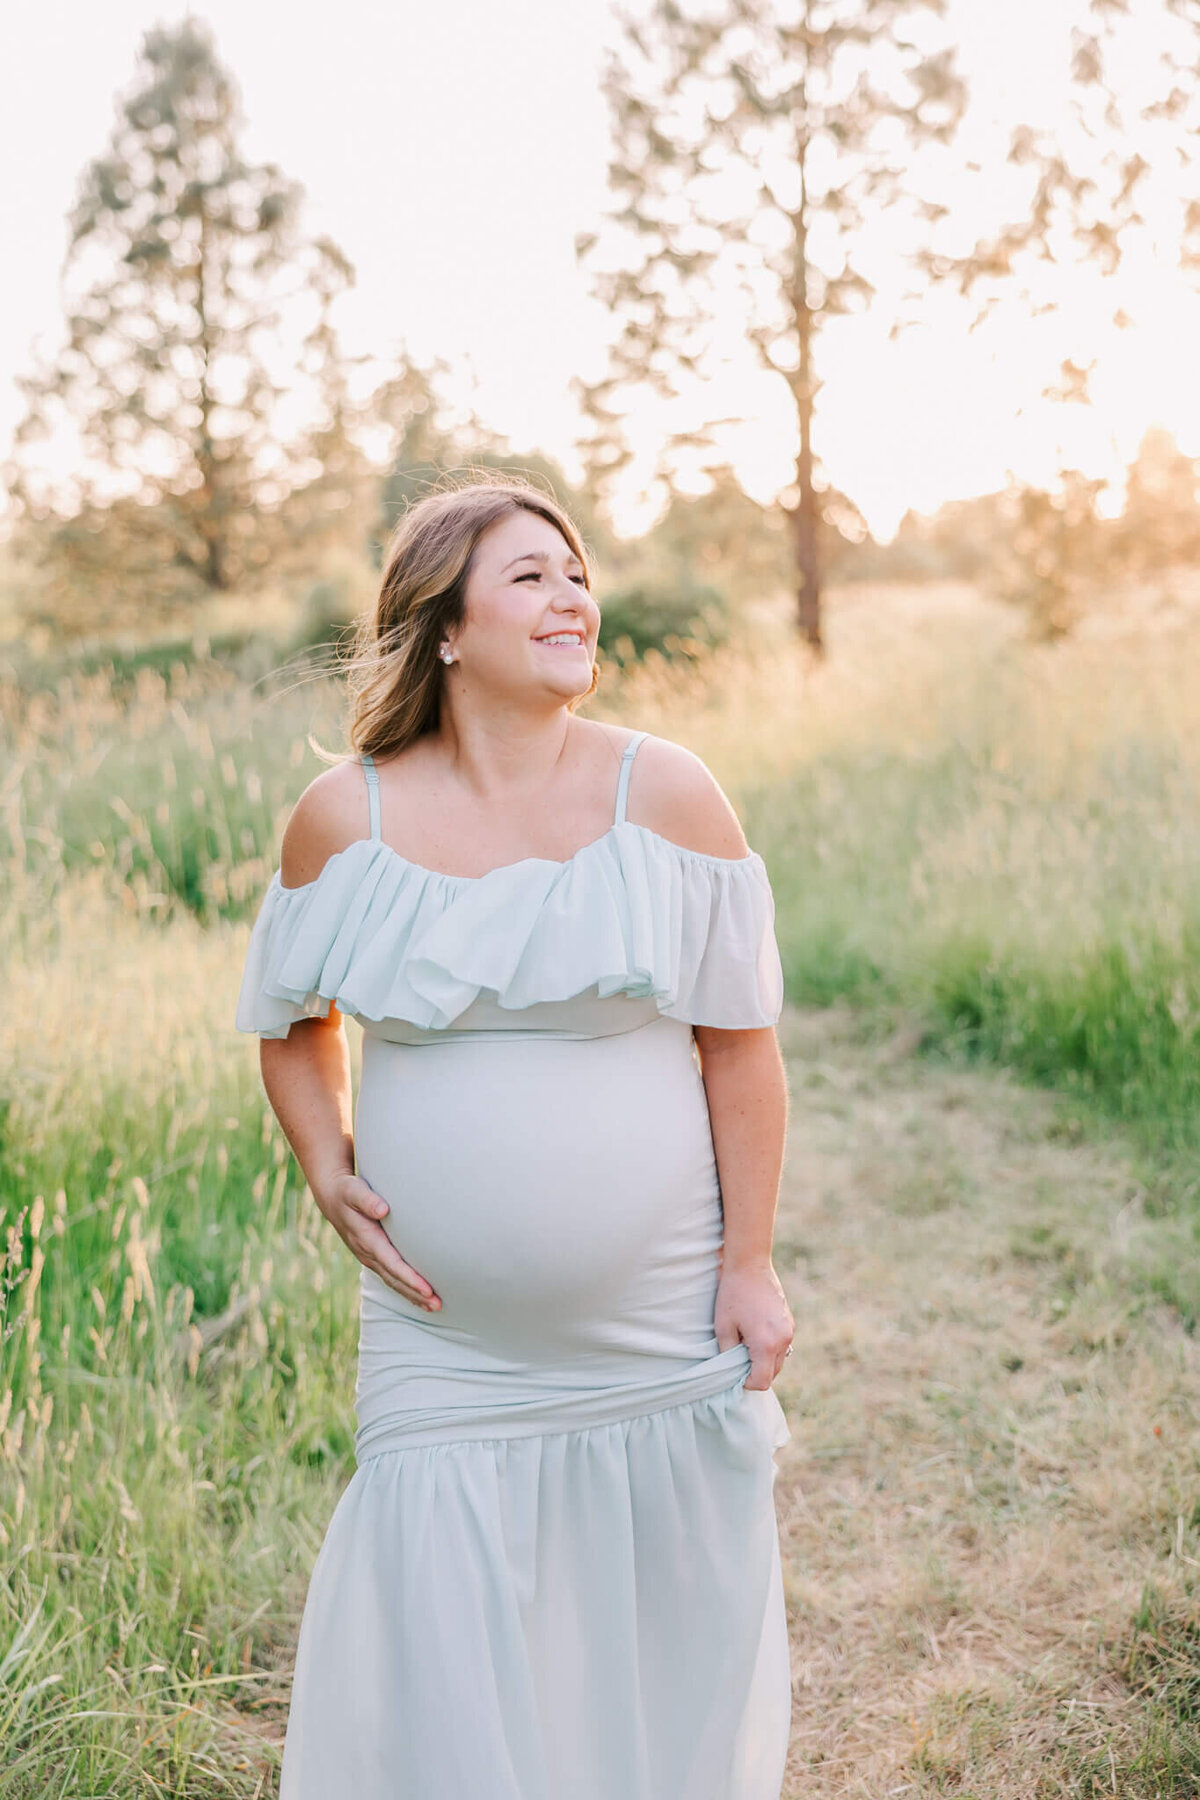 portrait of a pregnant woman taken by ann marshall photography in portland oregon. She is walking and smiling with her hand on her belly wearing a green dress.